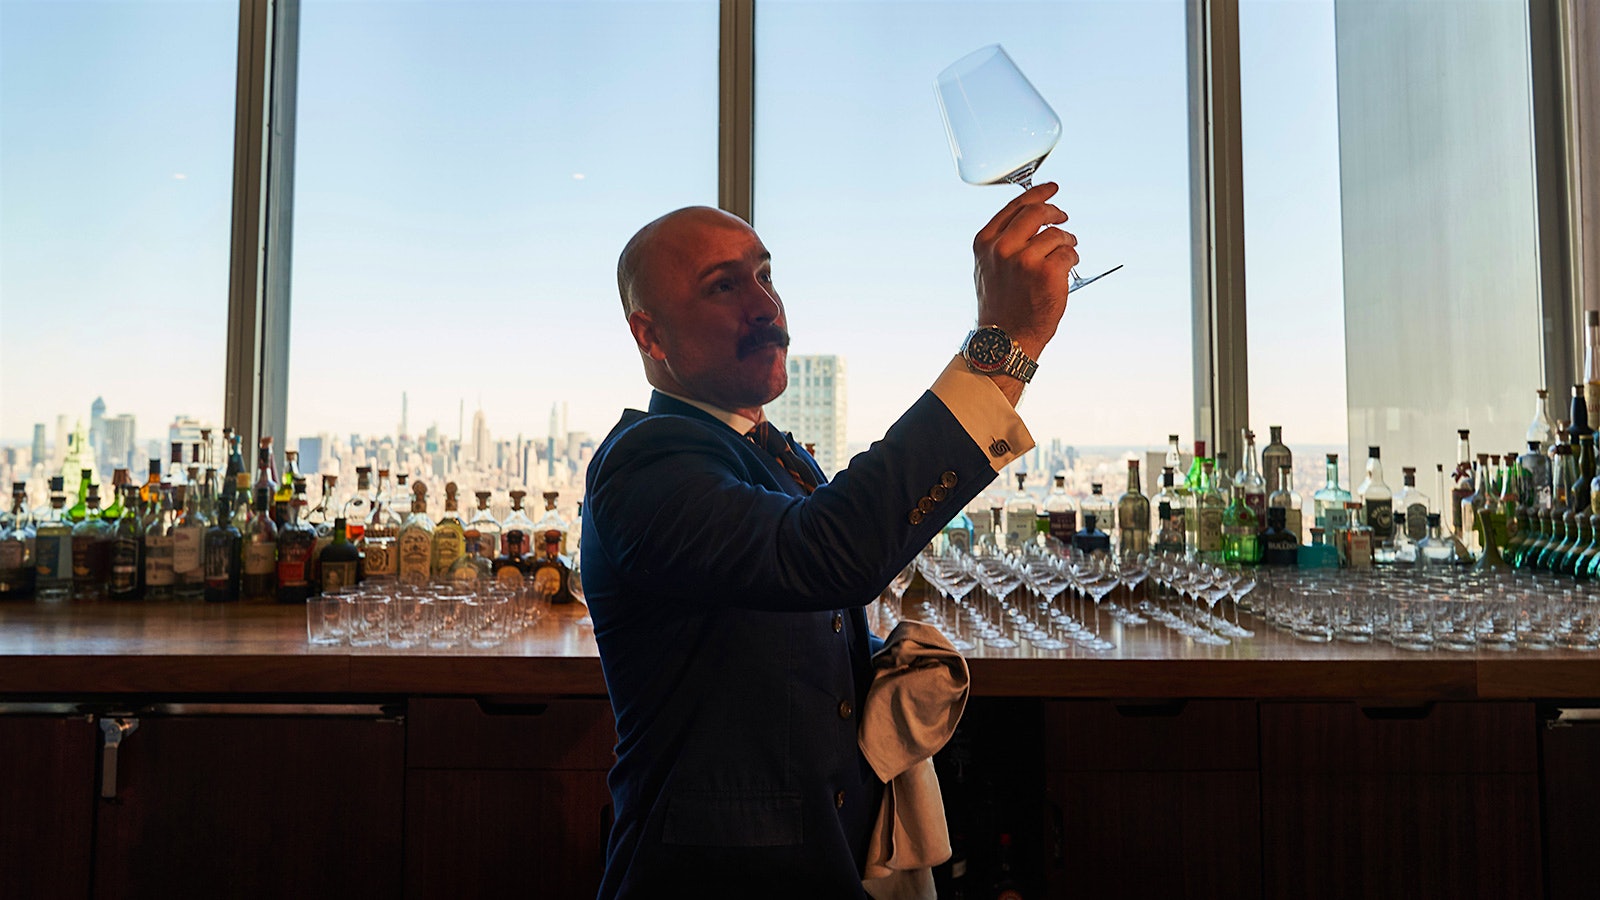  Manhatta beverage director William Edwards at the bar in front of the view over New York City 